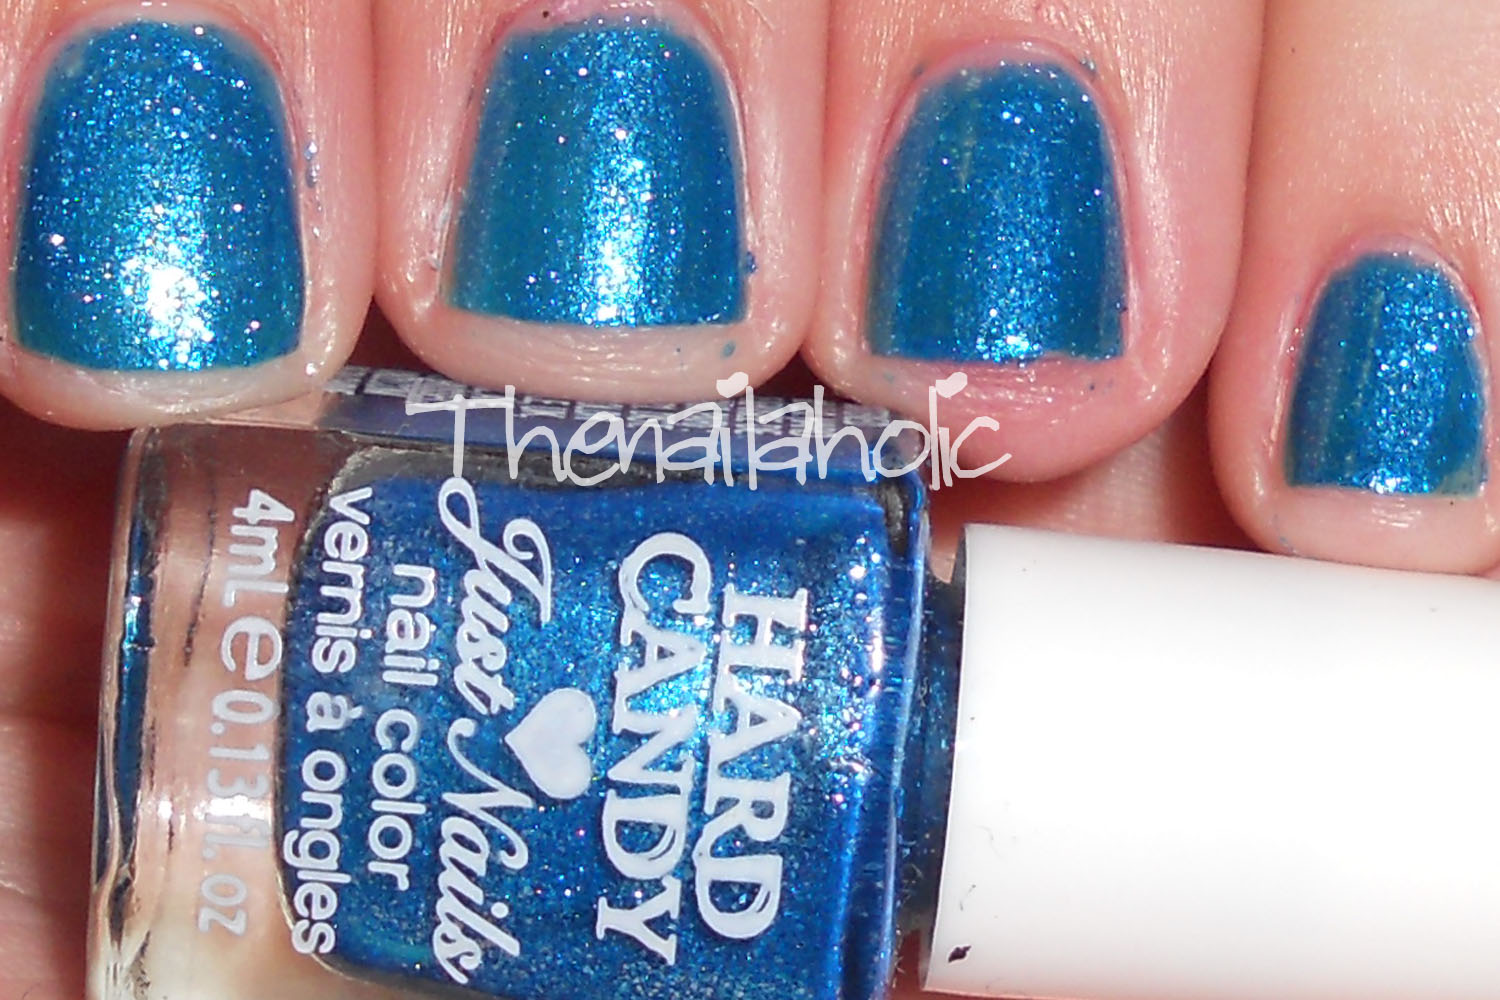 Hard Candy Just Nails - wide 7